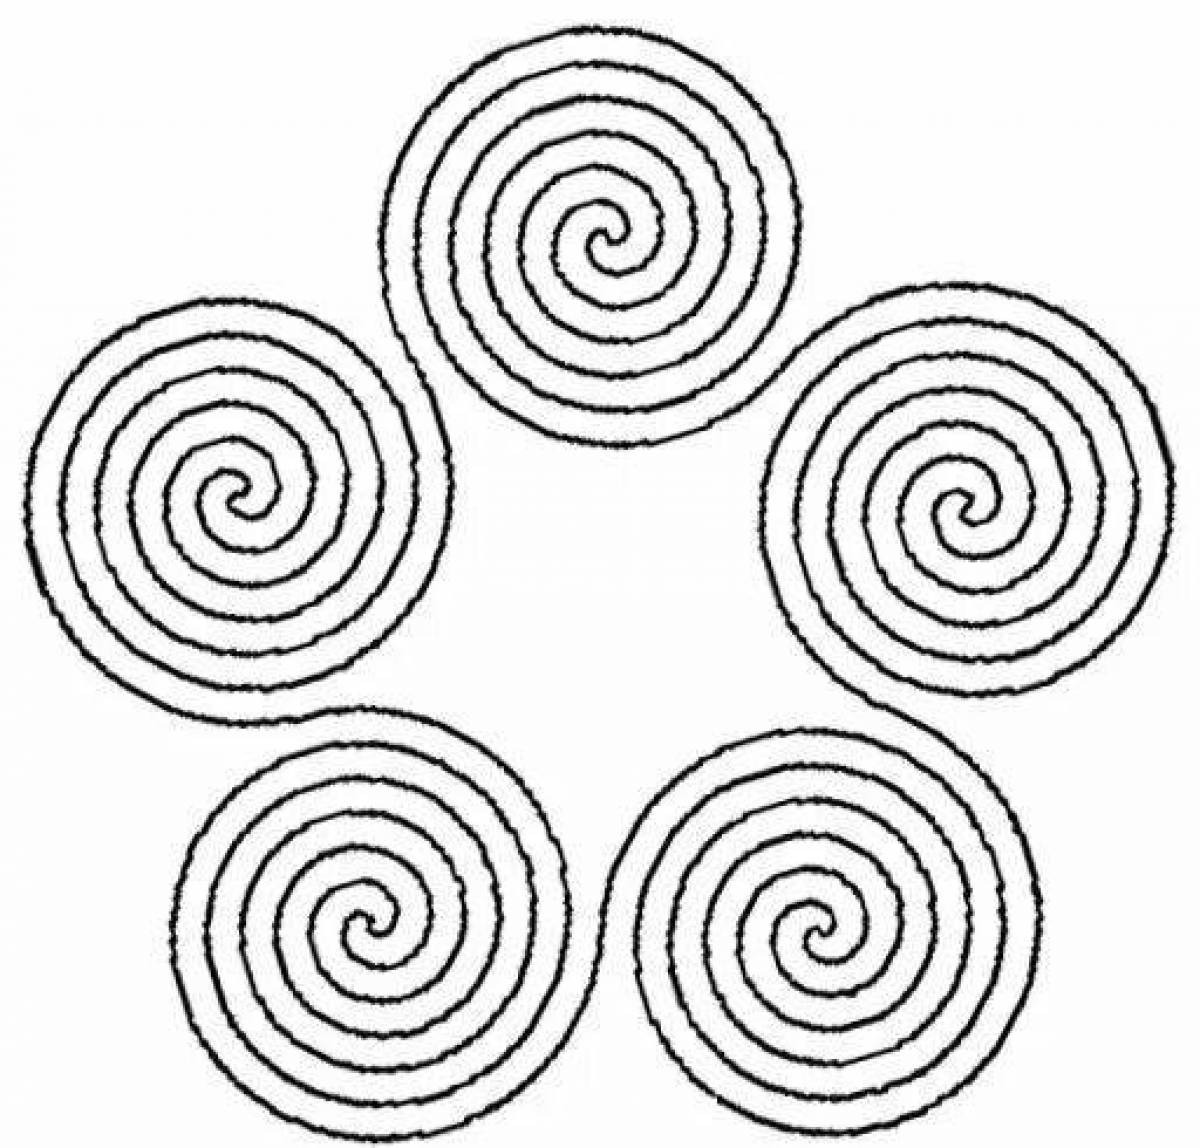 Coloring refined spiral pattern